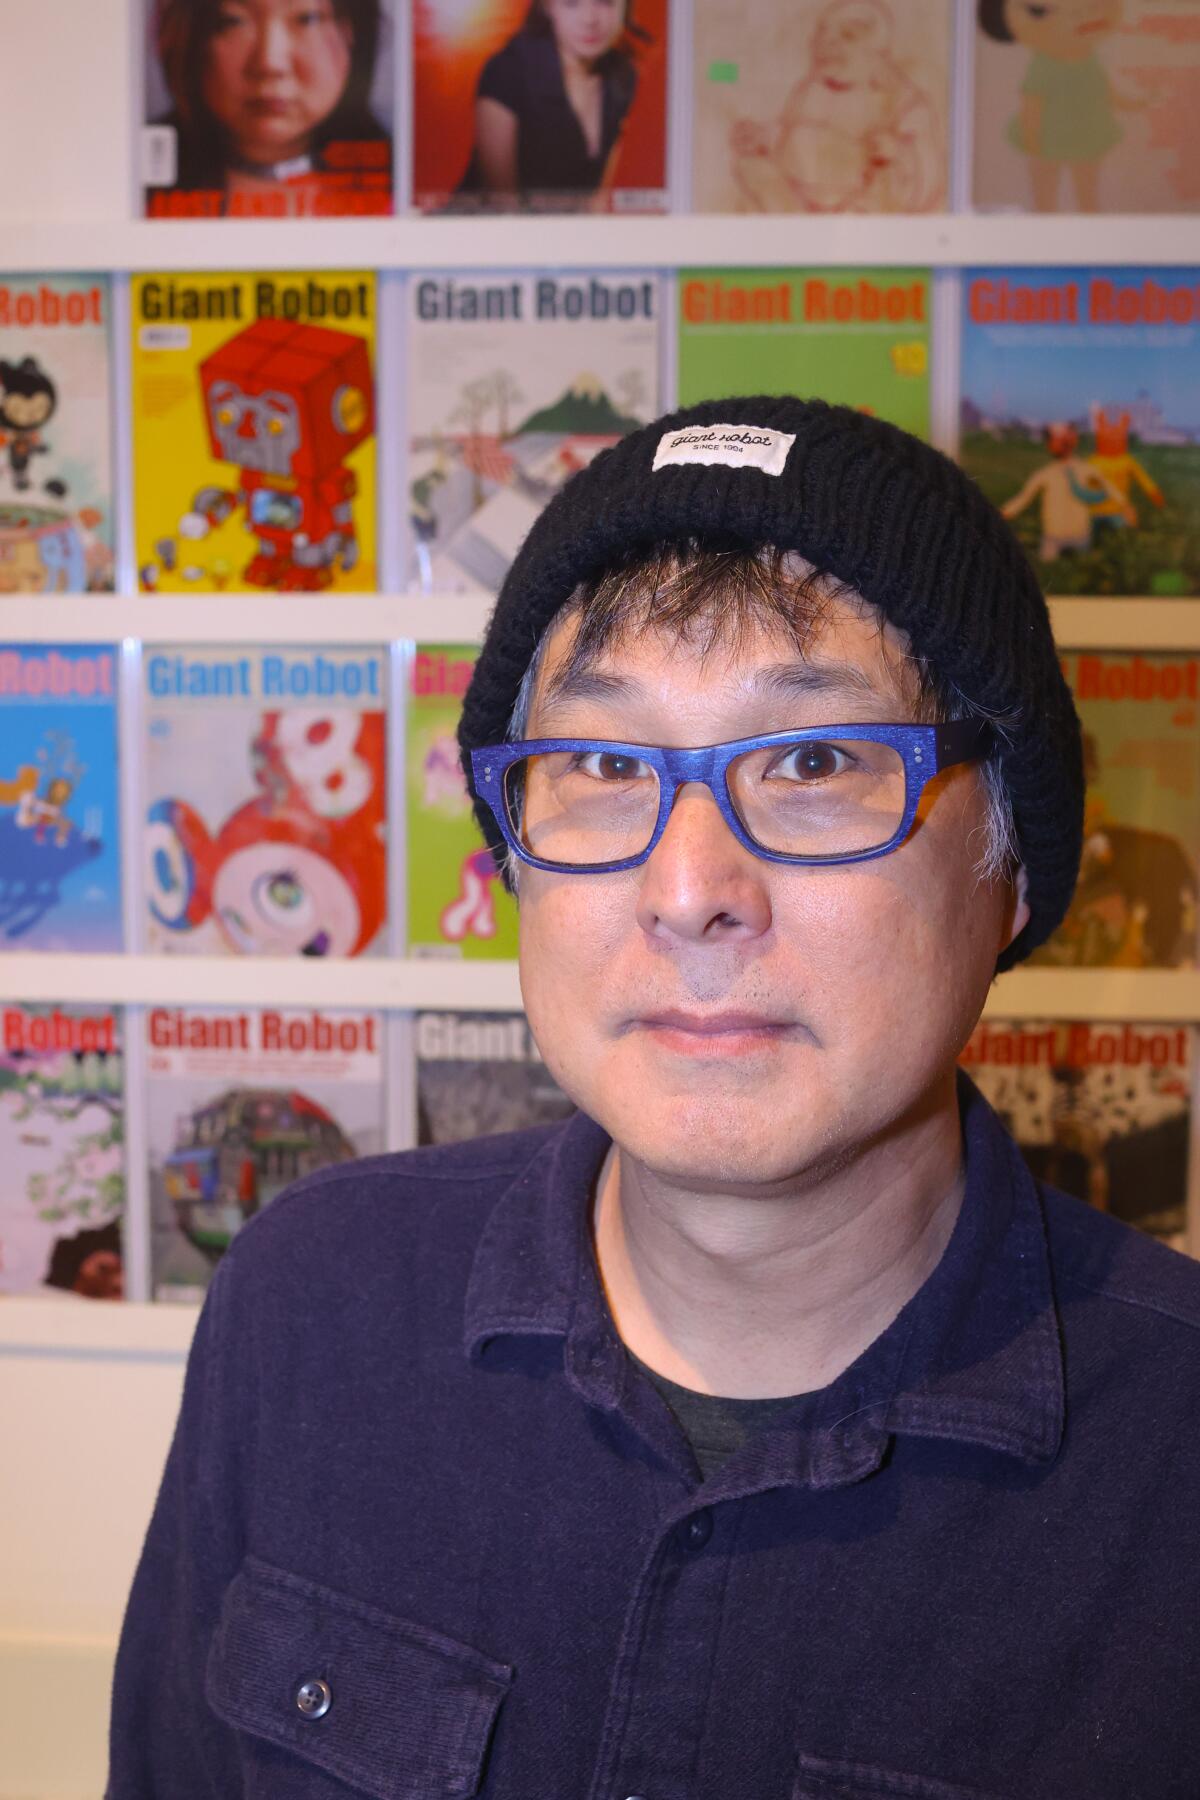 A man in glasses and a knit cap stands in front of a display of magazine covers.